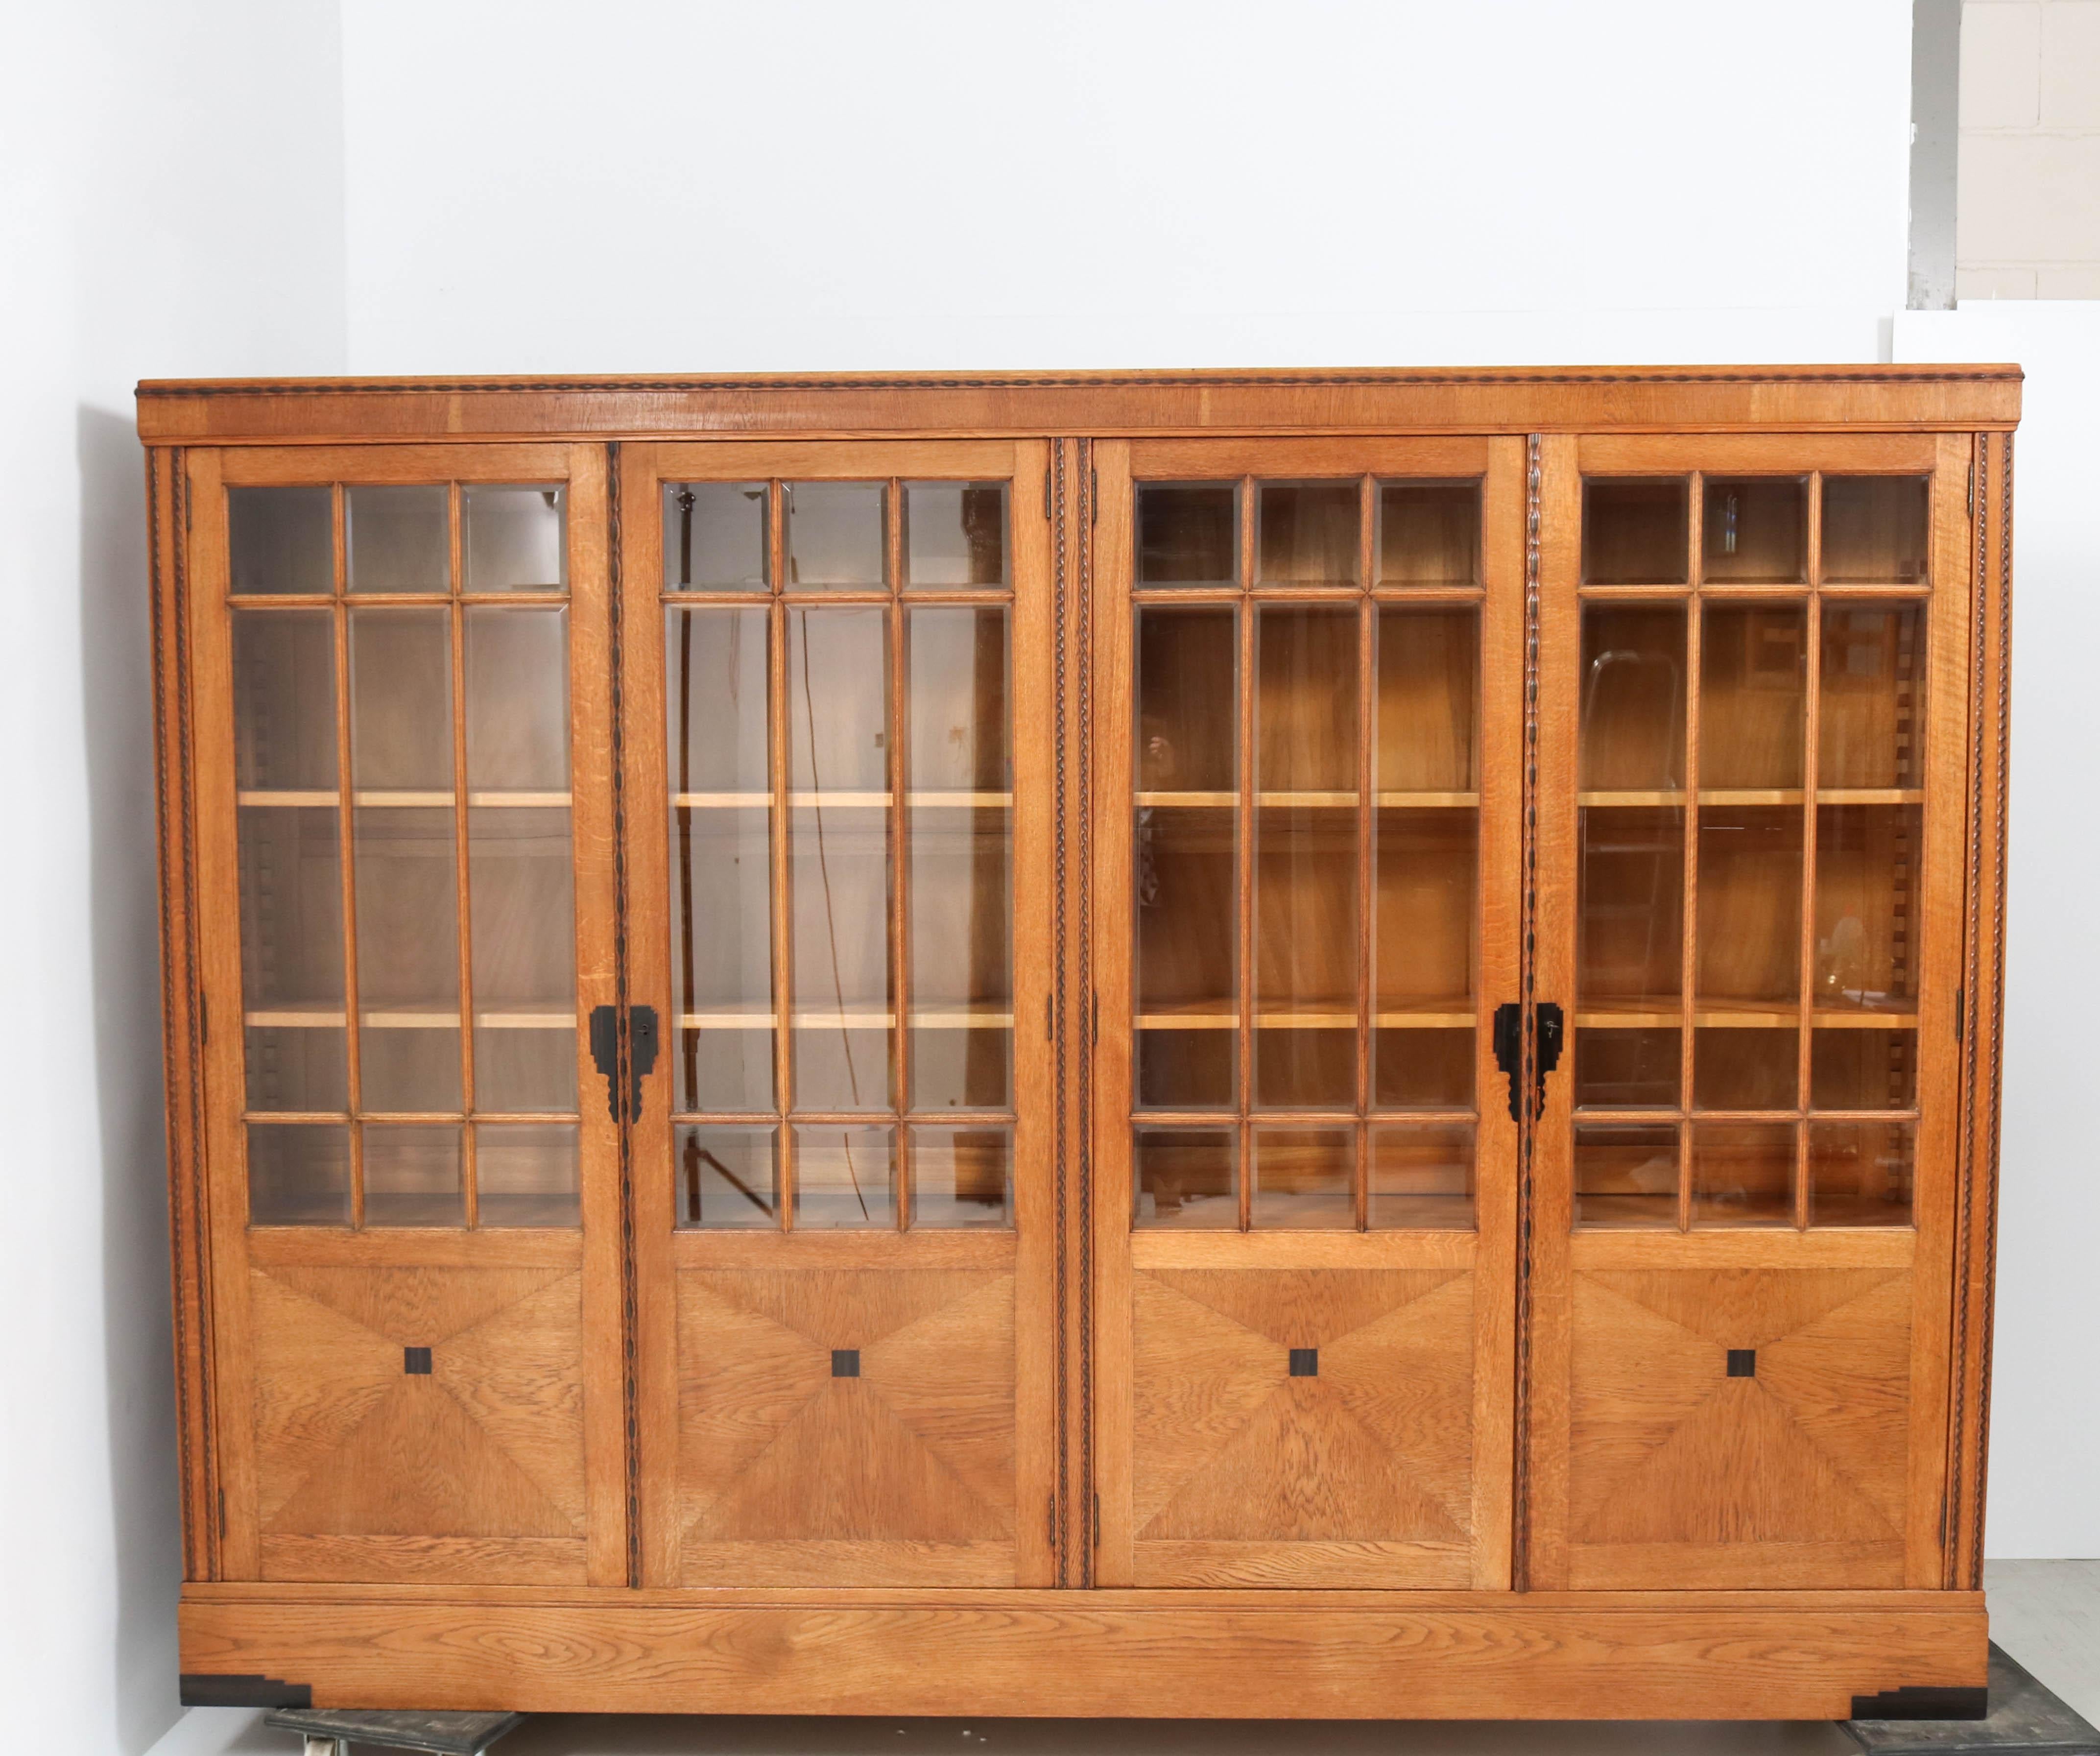 Magnificent and rare Art Deco Amsterdamse School library bookcase.
Striking Dutch design from the 1920s.
Solid oak and original oak veneer with macassar ebony lining.
Each of the four doors has nine original beveled glass pieces.
Ten original